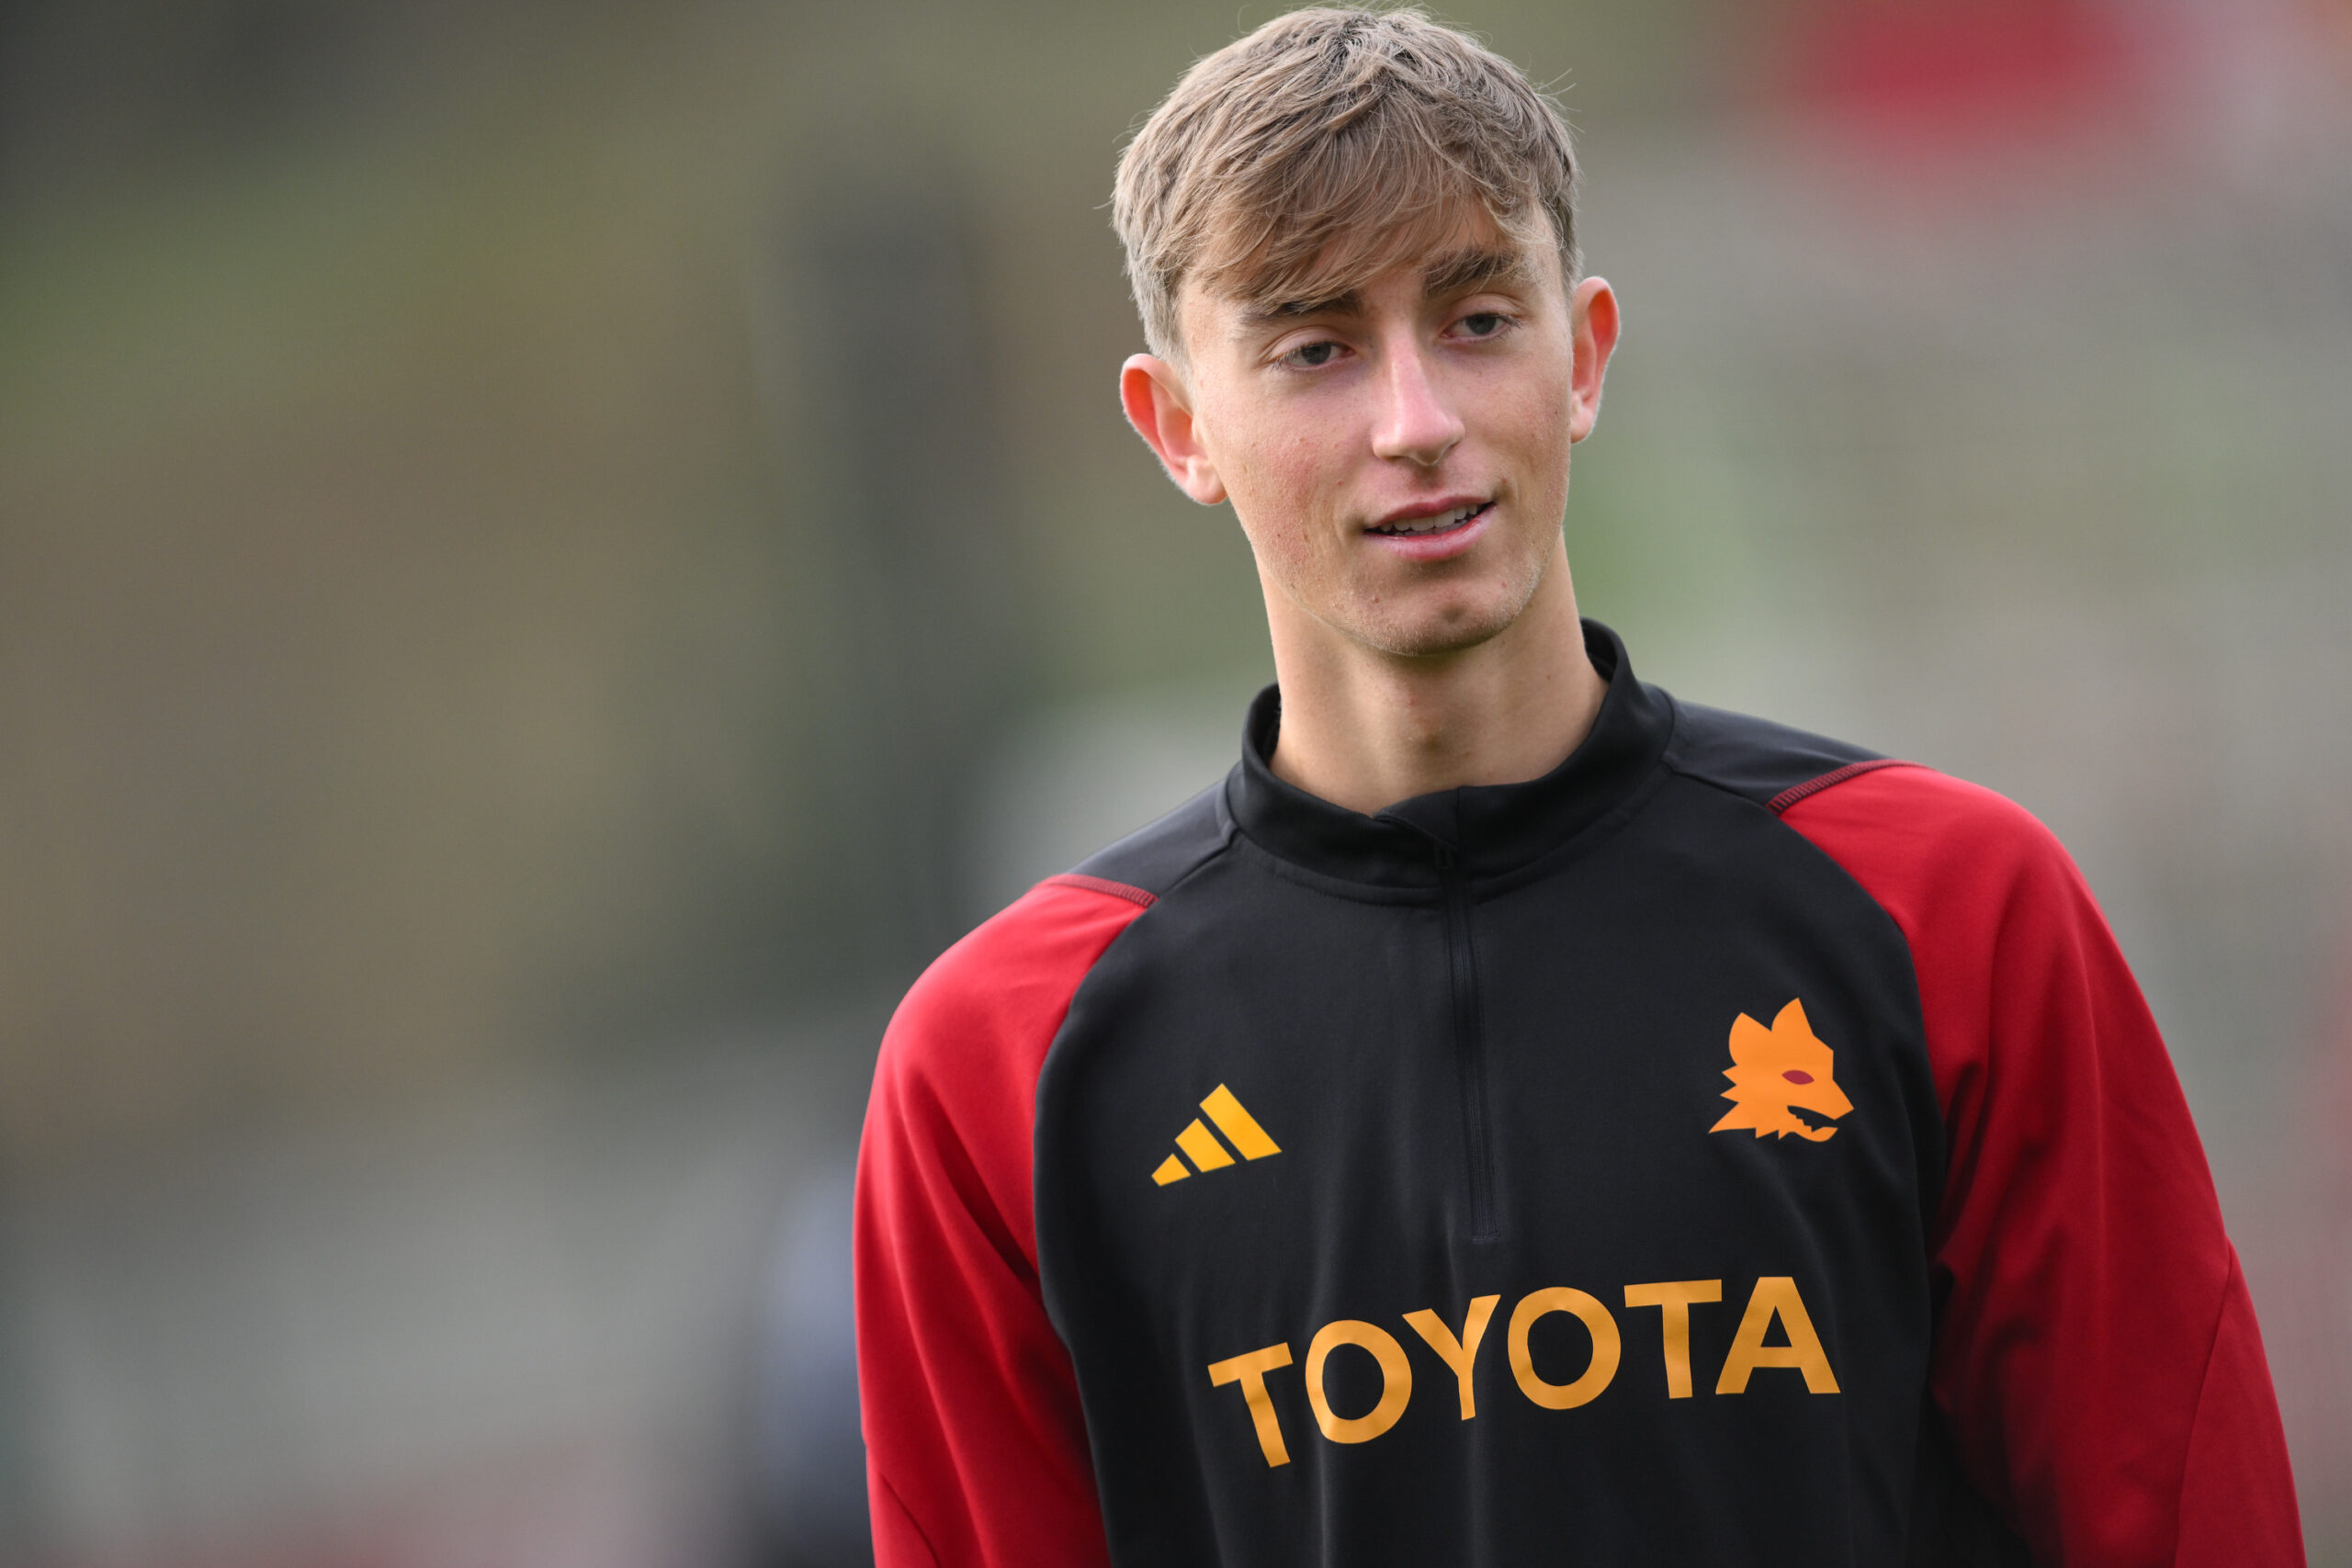 Juventus continue to work on the Teun Koopmeiners deal, especially after his recent declarations. However, they are unlikely to meet Atalanta's request.